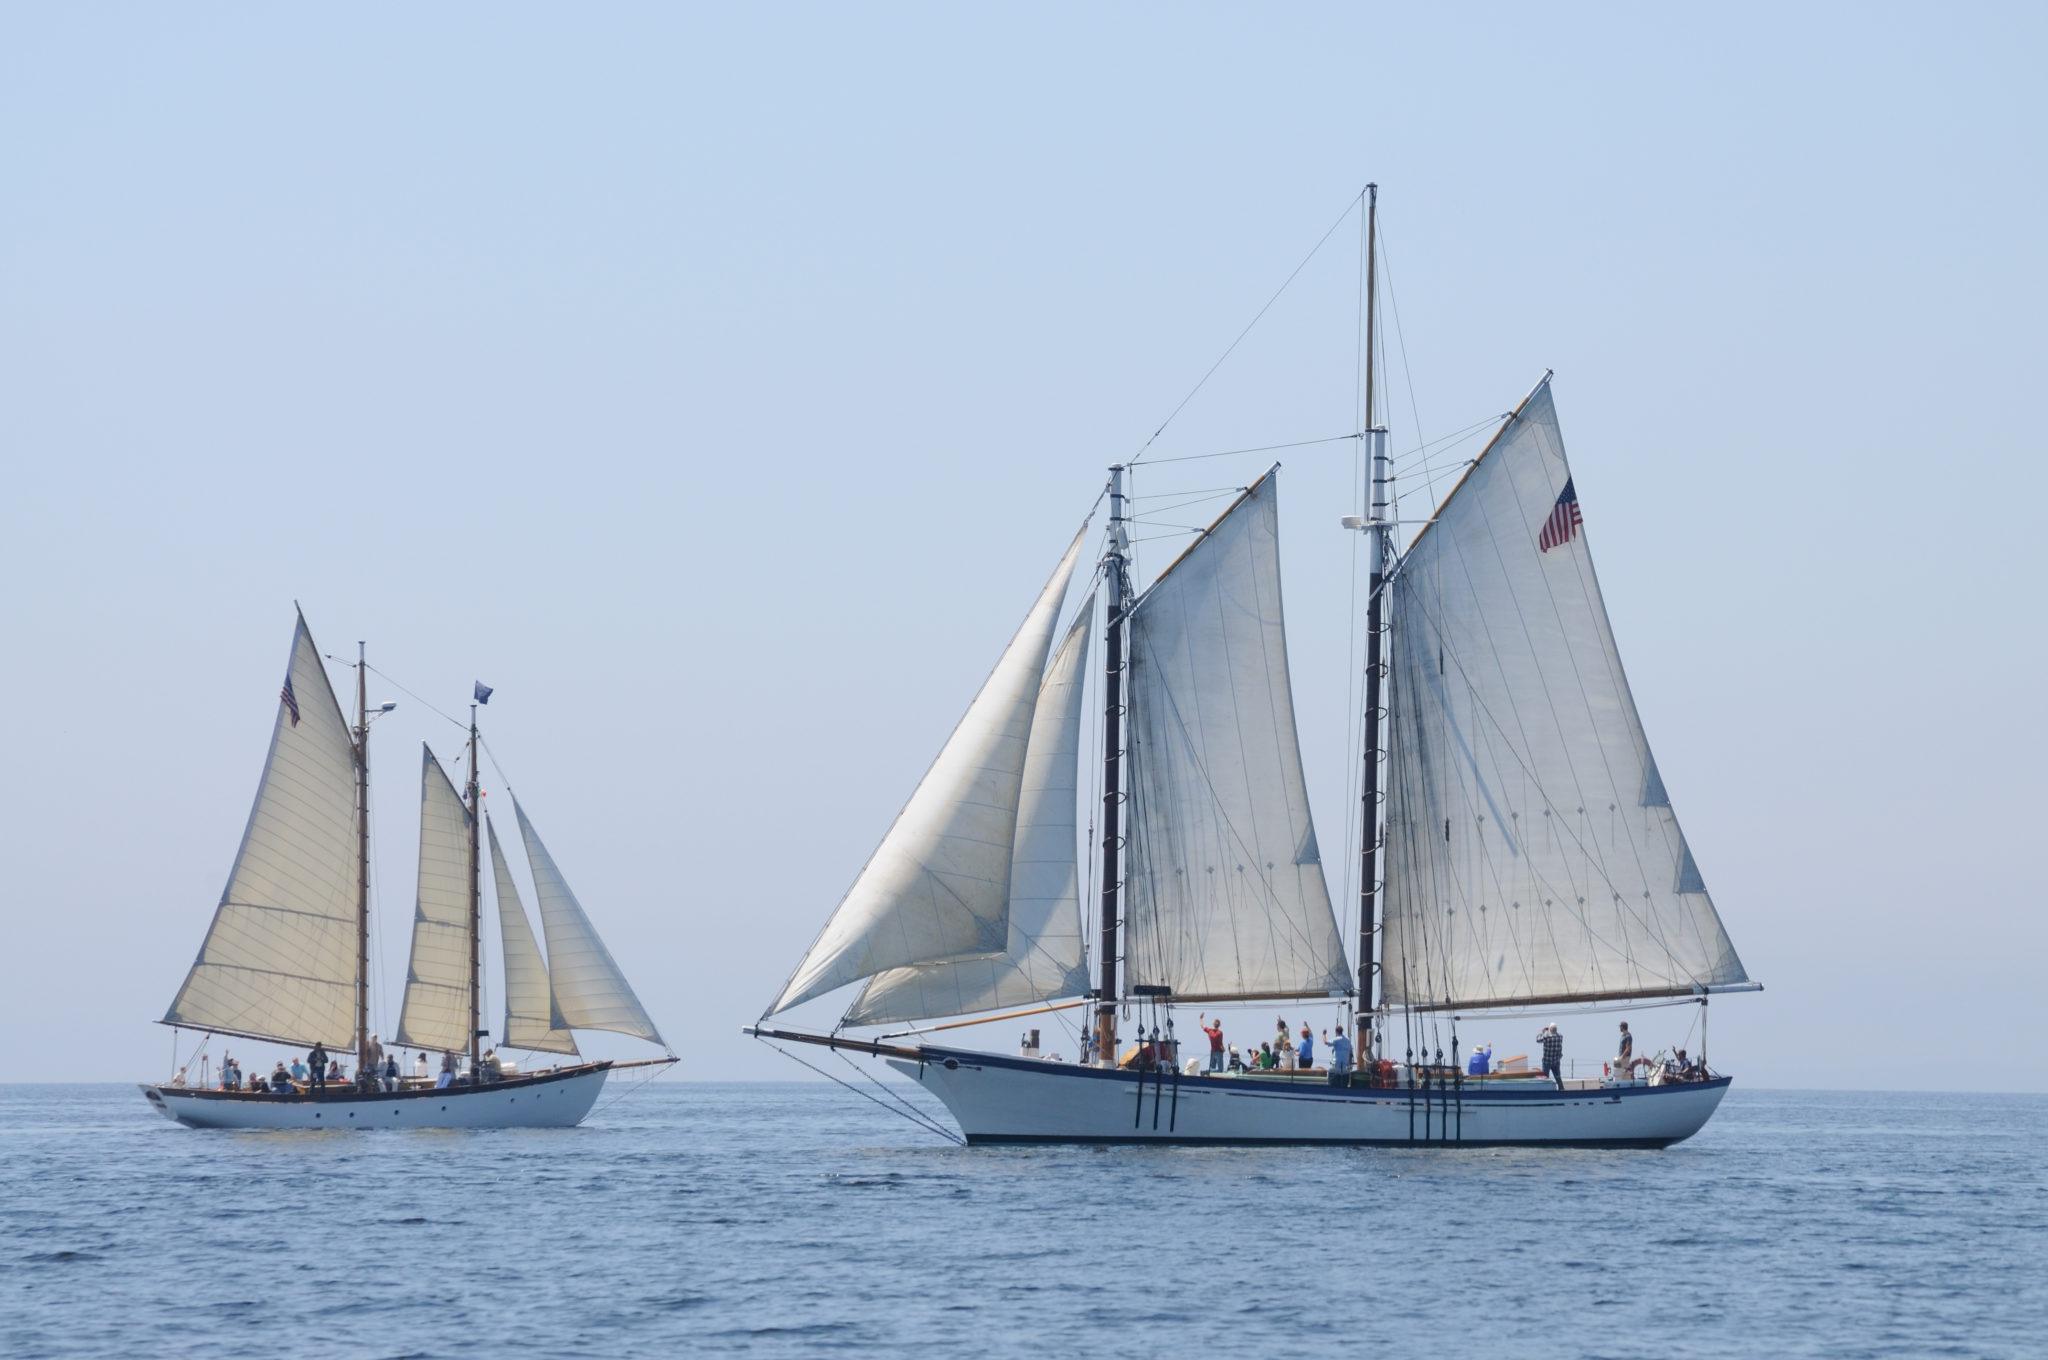 Schooner: Penobscot Bay, A sailboat with at least two masts and oblique sails on all masts. 2050x1360 HD Background.